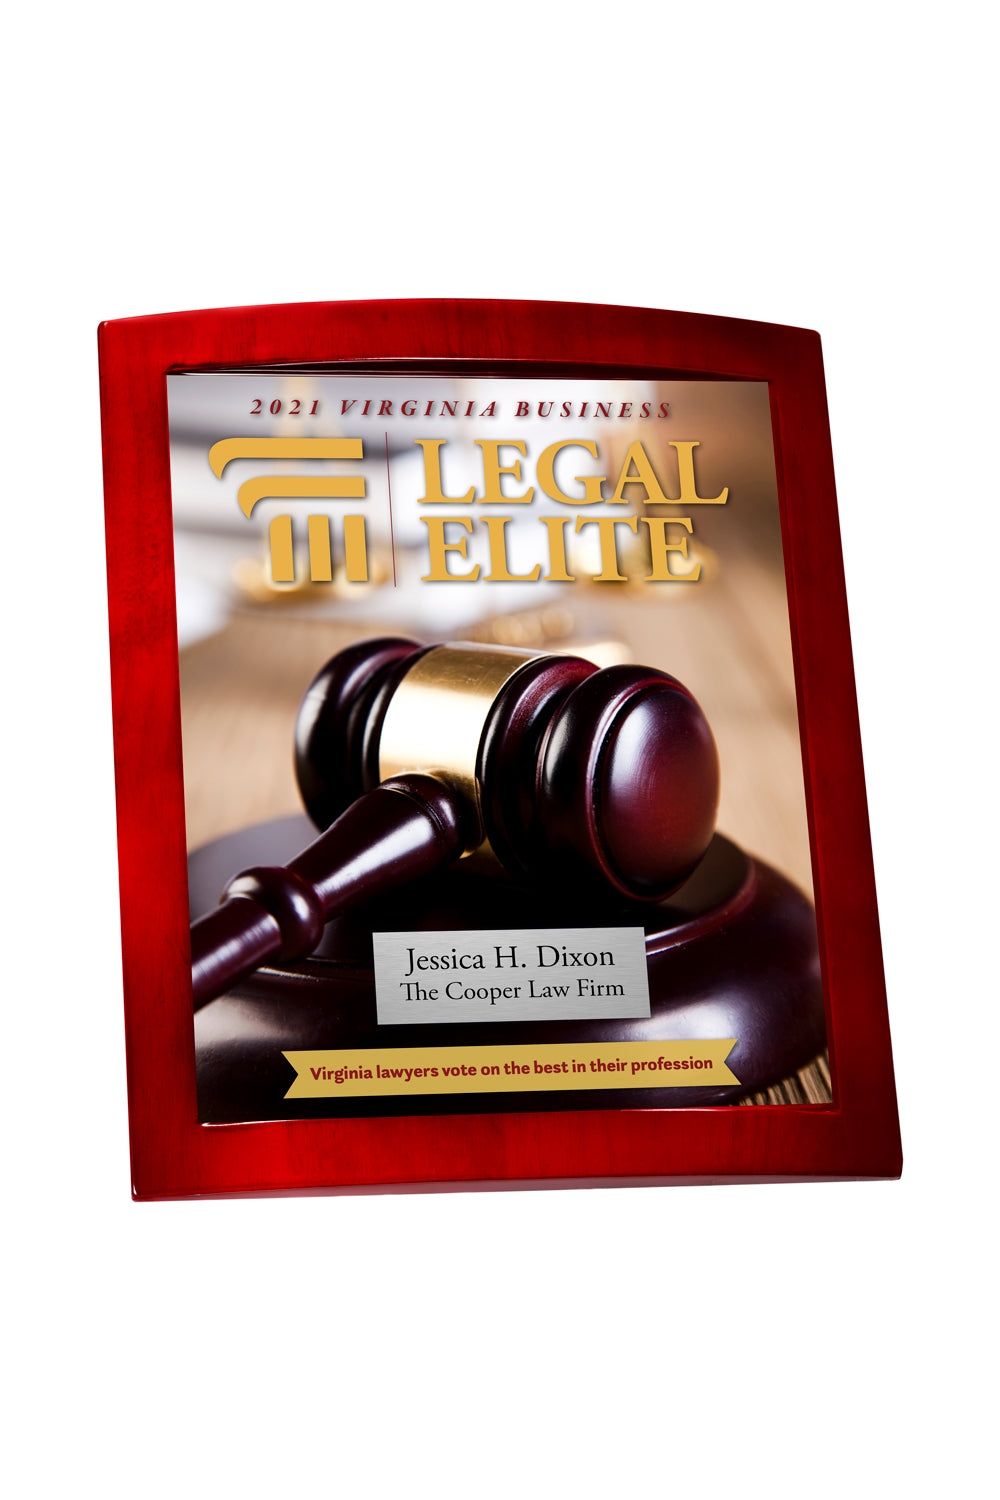 Legal Elite Award Plaque - Piano Finish with Metal Inlay